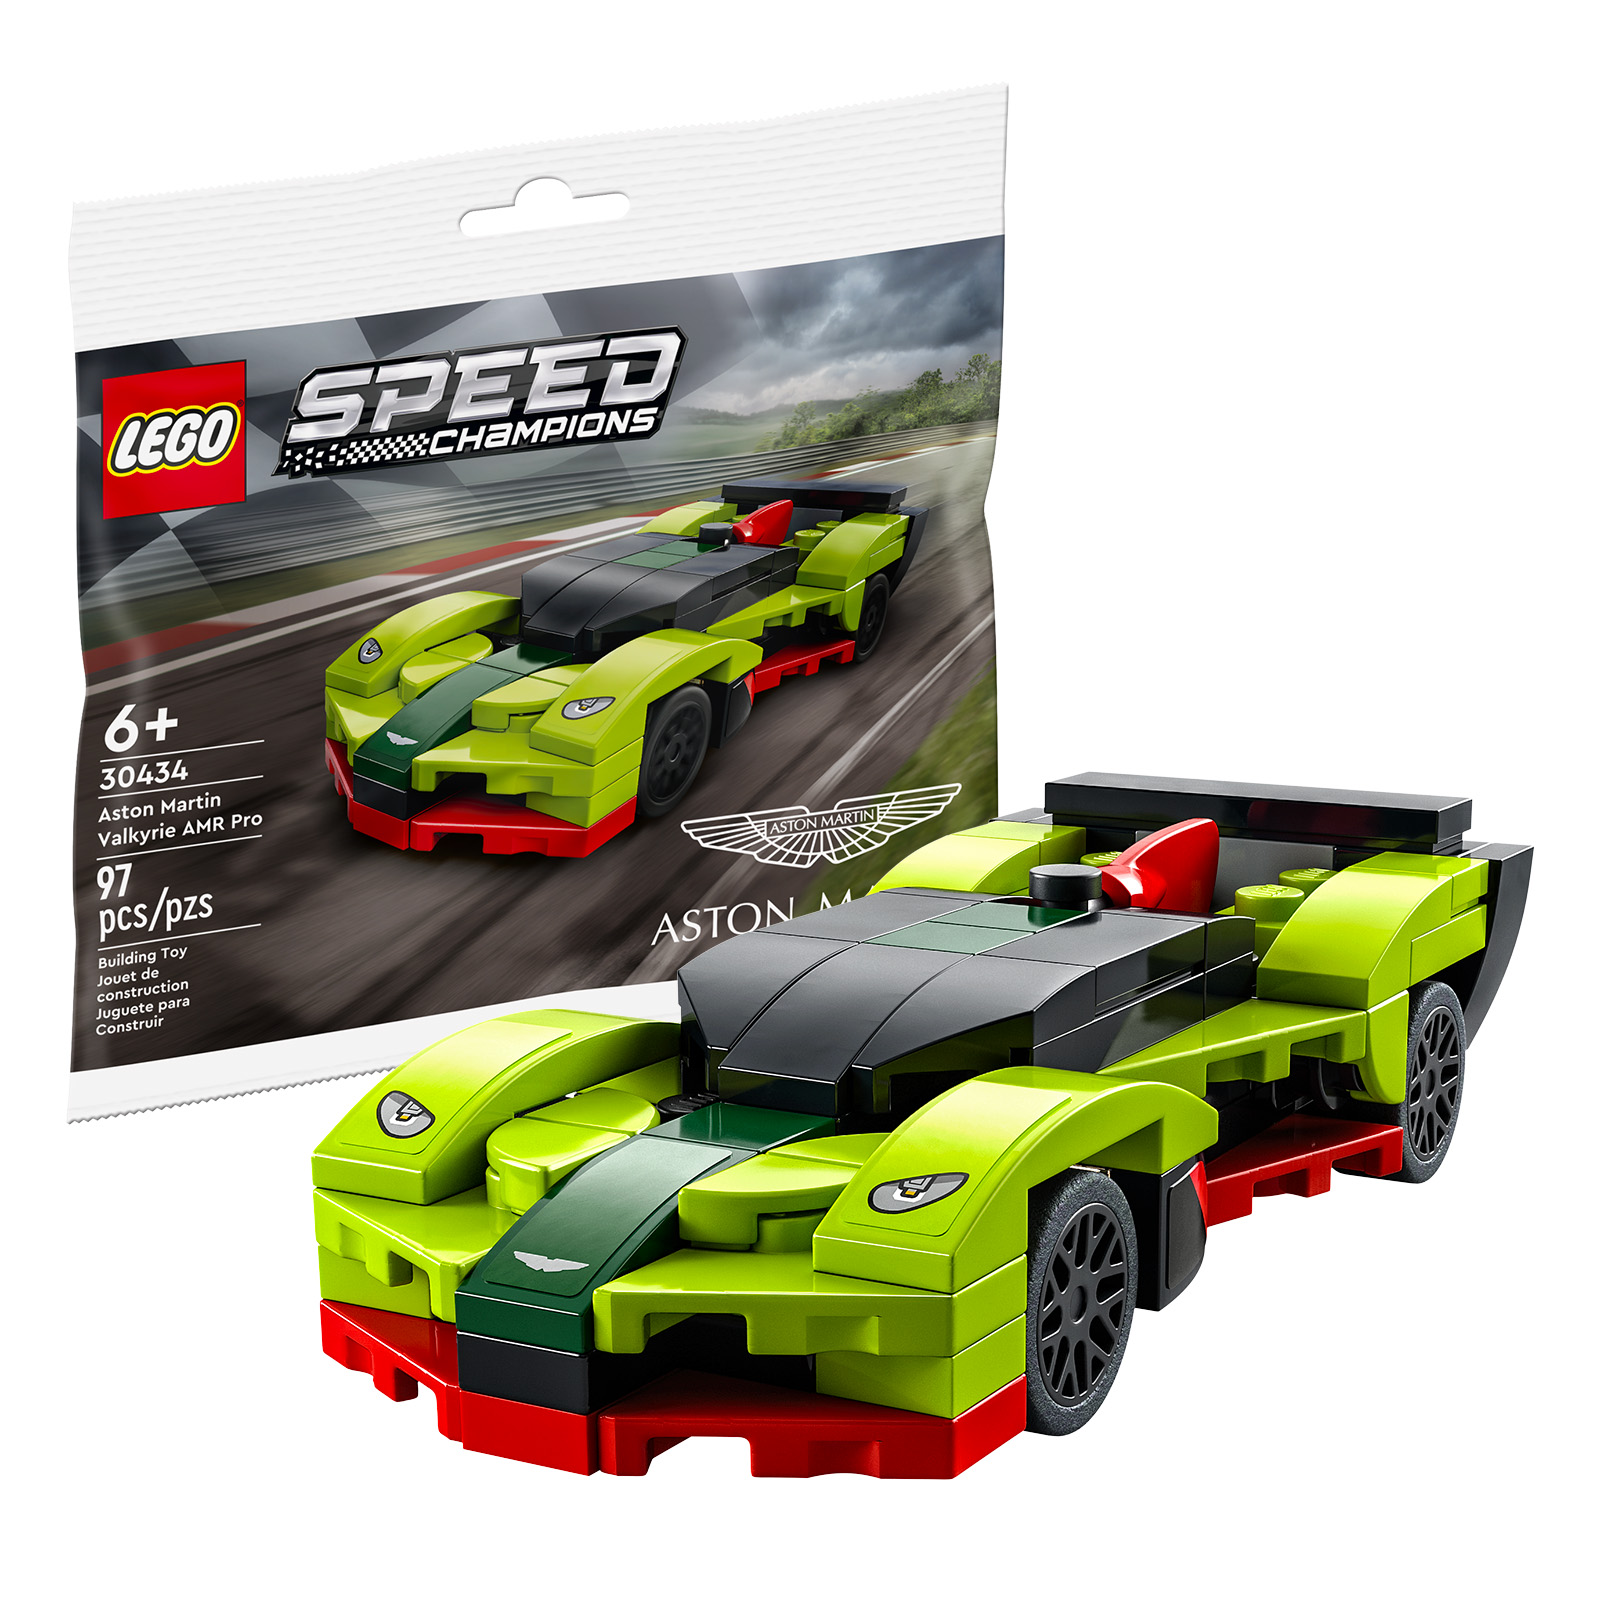 On the LEGO Shop: the LEGO Speed ​​Champions 30434 Aston Martin Valkyrie AMR Pro polybag is free with purchases over €40